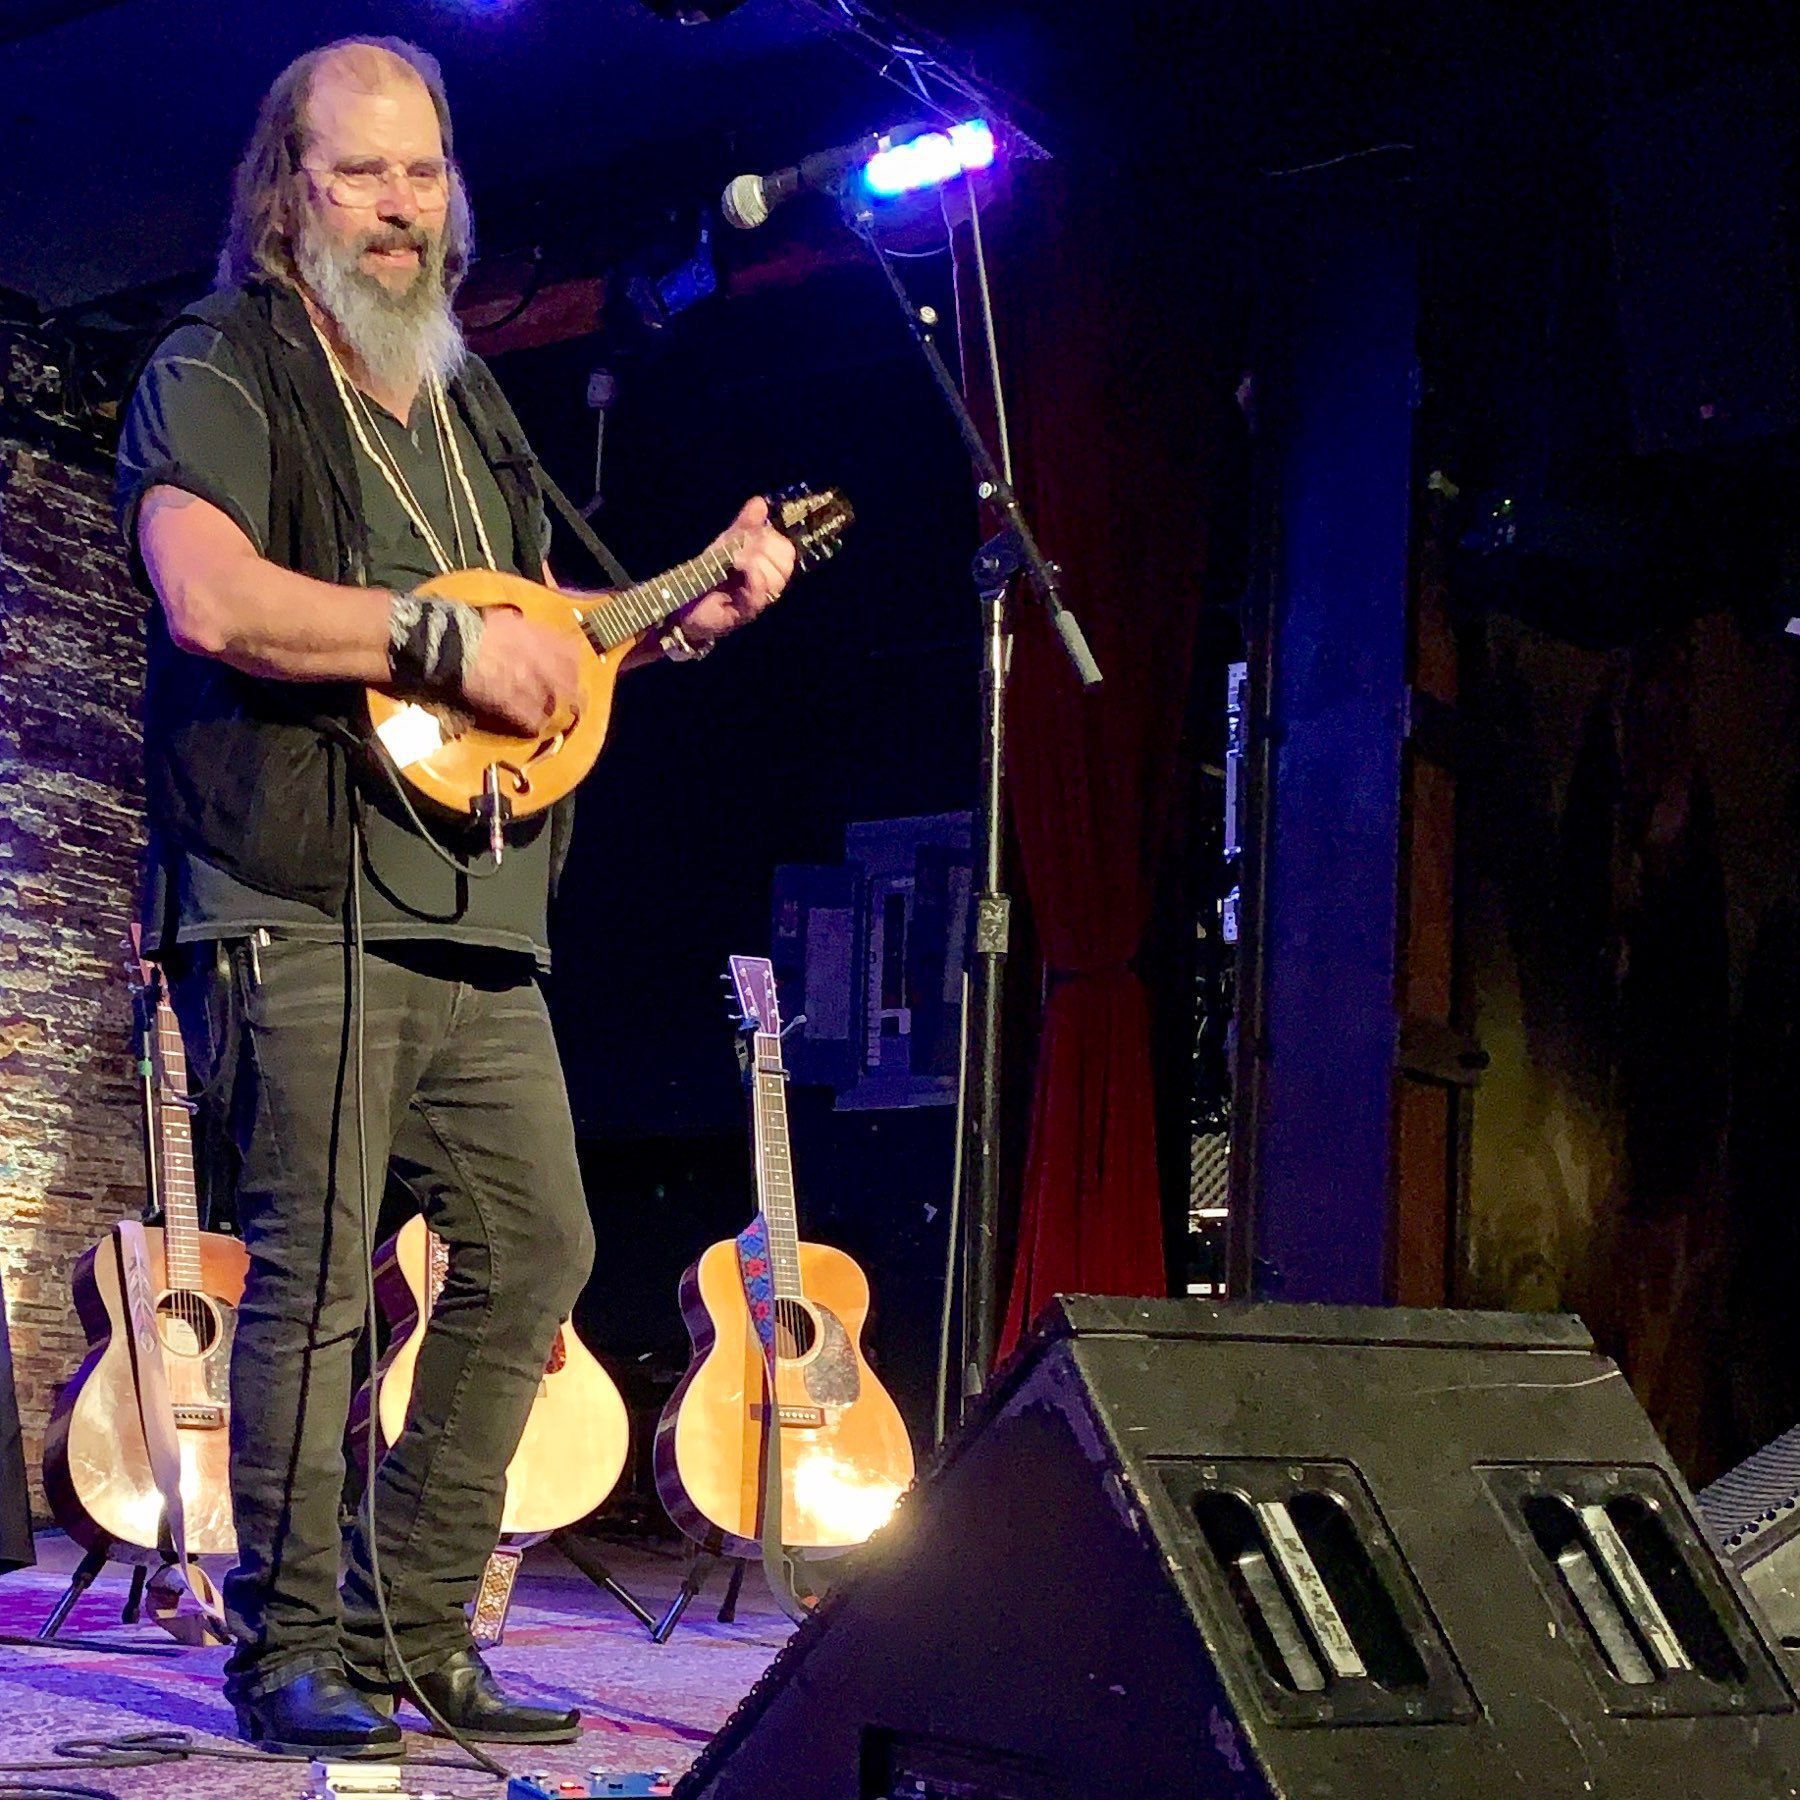 Steve Earle on stage at City Winery, 2019